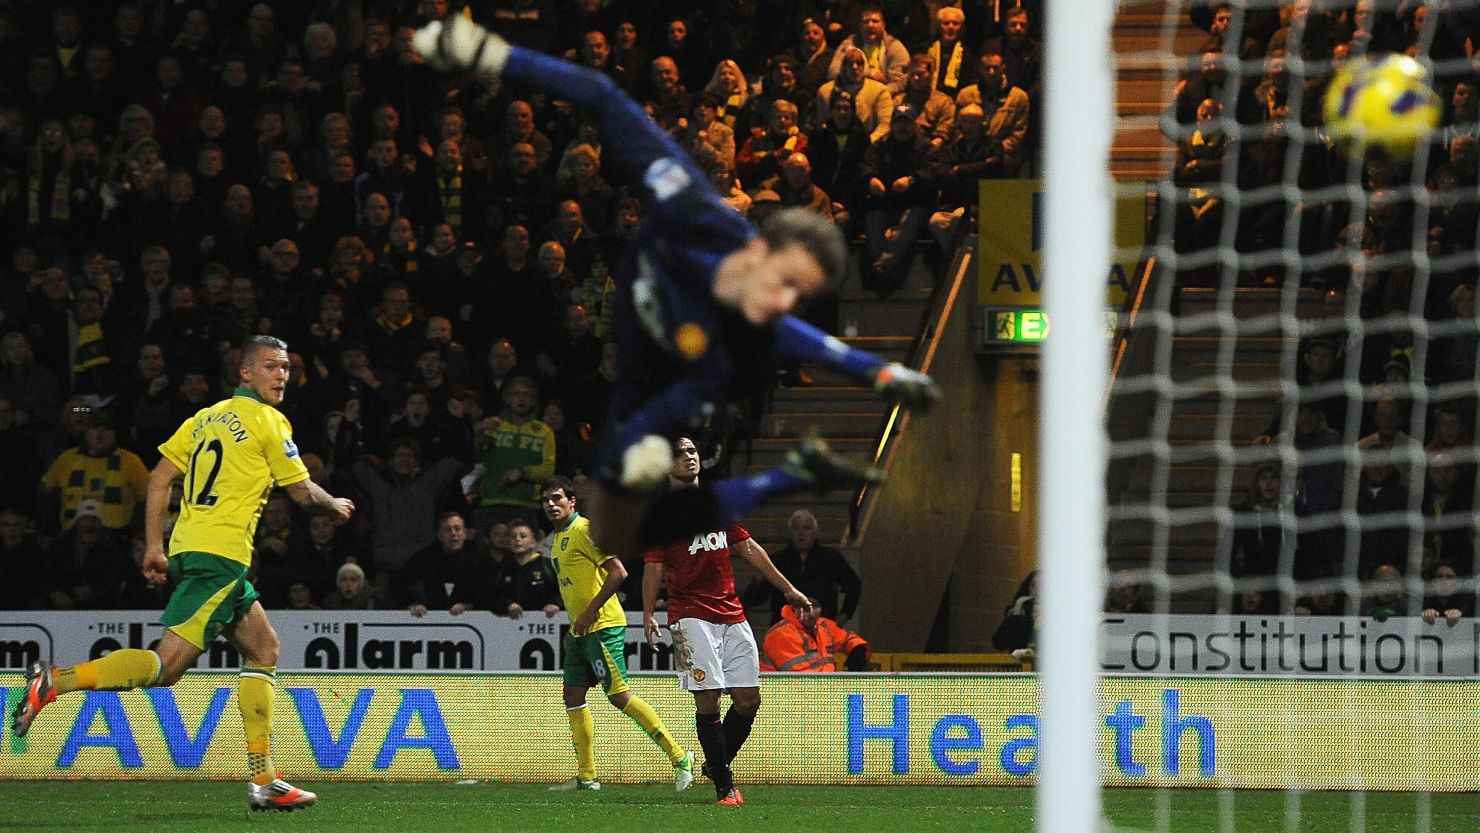  Norwich midfielder Anthony Pilkington heads the winning goal past Manchester United goalkeeper Anders Lindegaard.